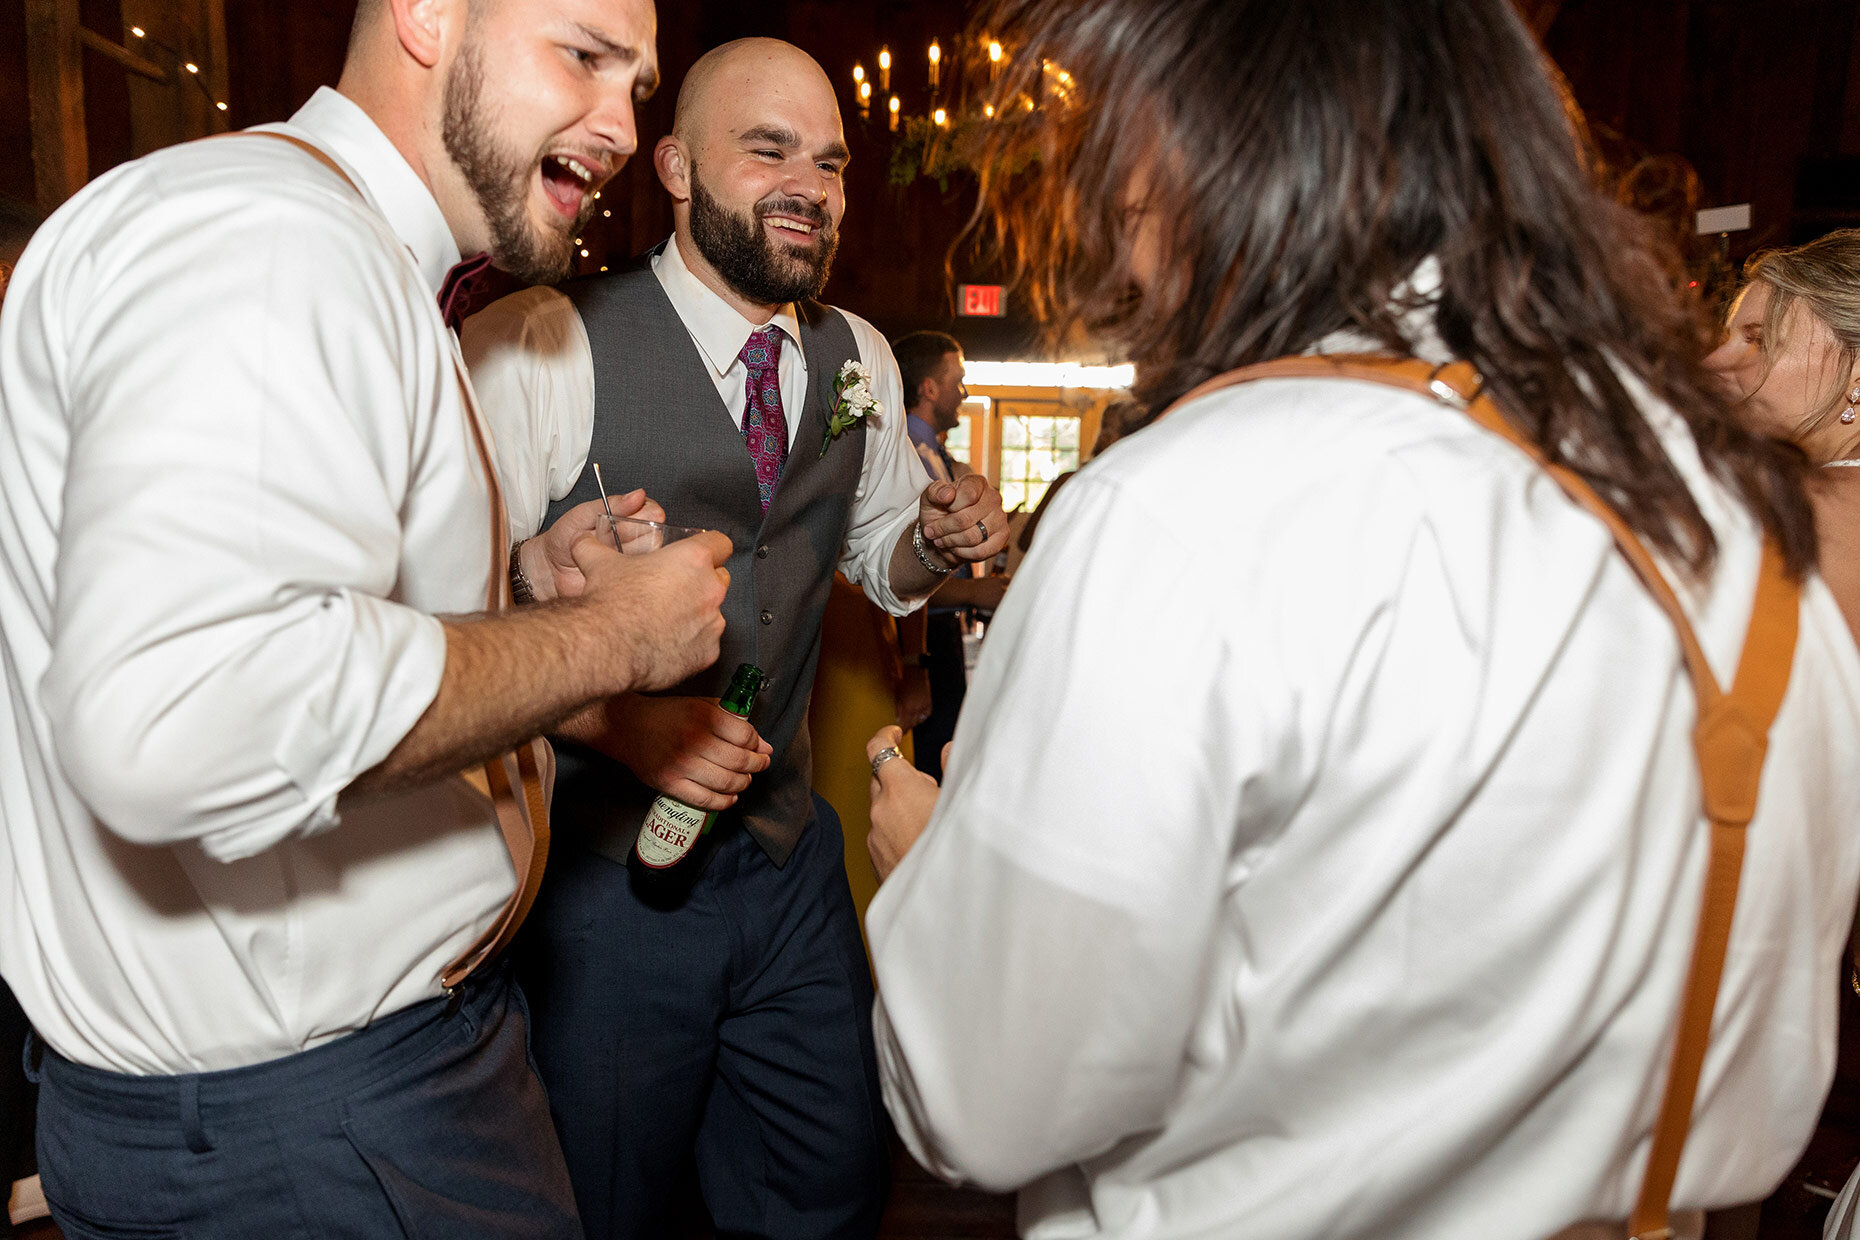 Groom dances with friends at reception